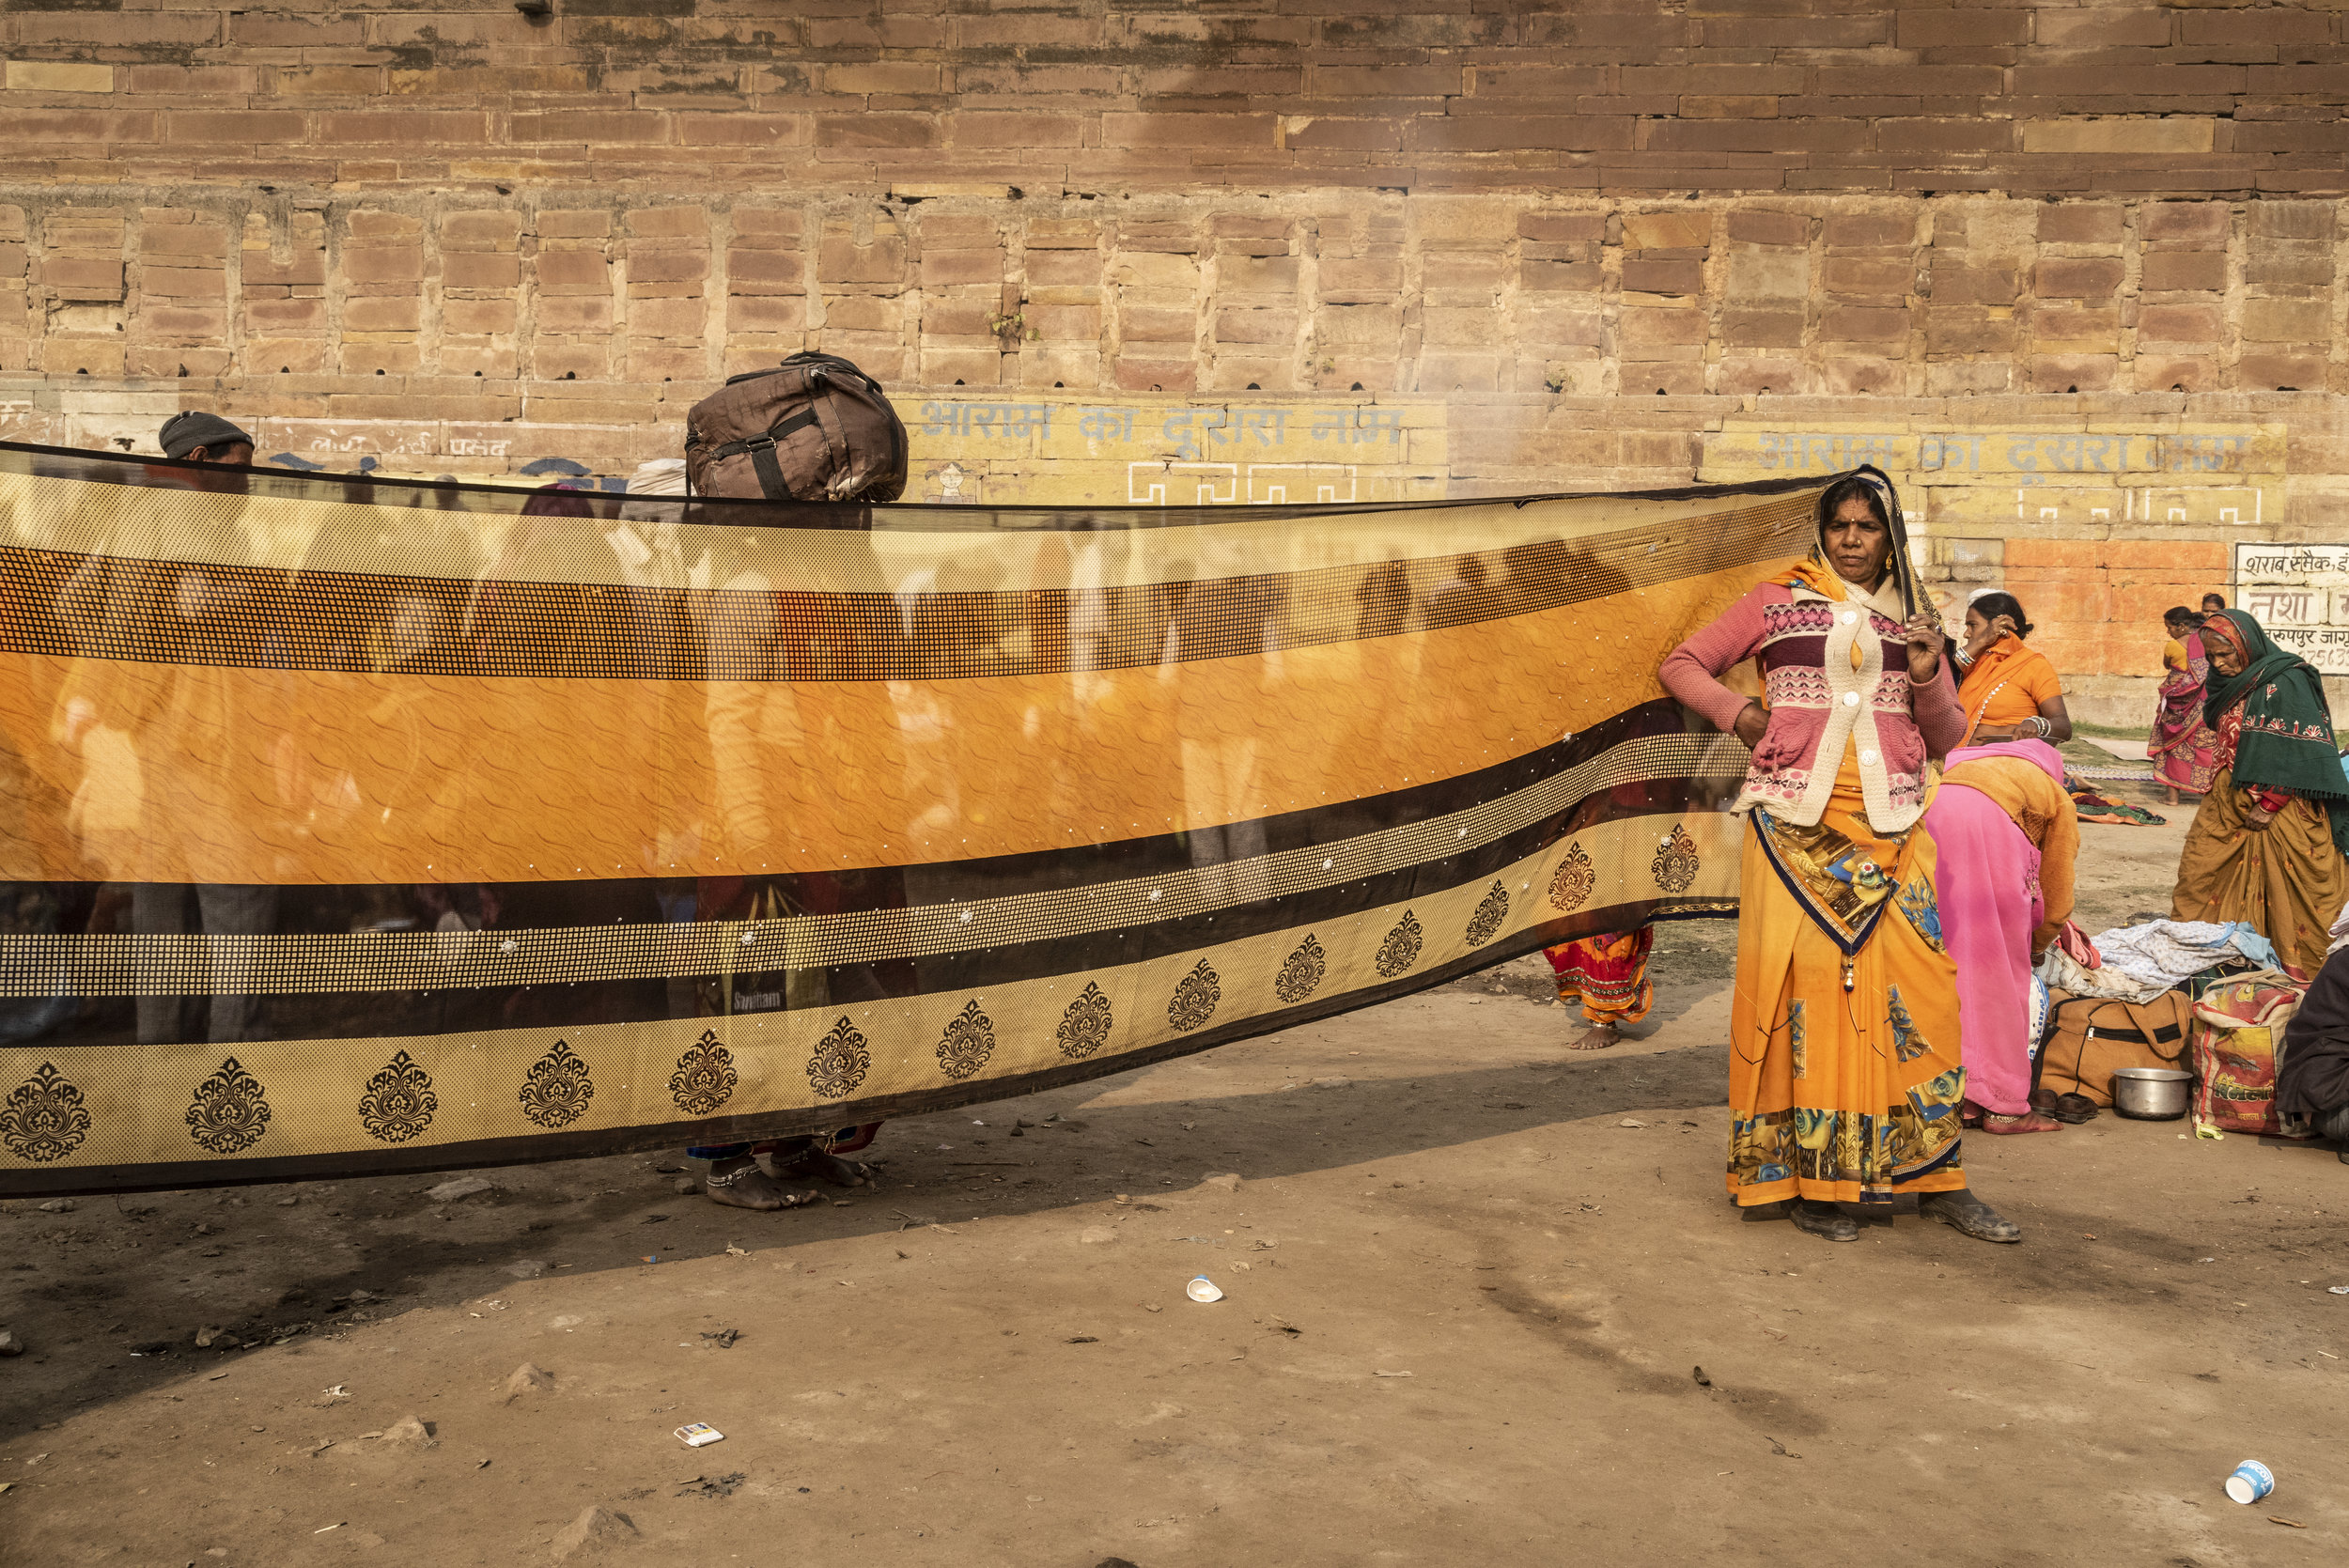  A woman dries her bright orange saree in the midday sun, likely after dipping it in the Ganges during her morning trip to Sangam. This strange yet beautiful occurrence became common place by the time I’d left the Kumbh. I will always remember these 